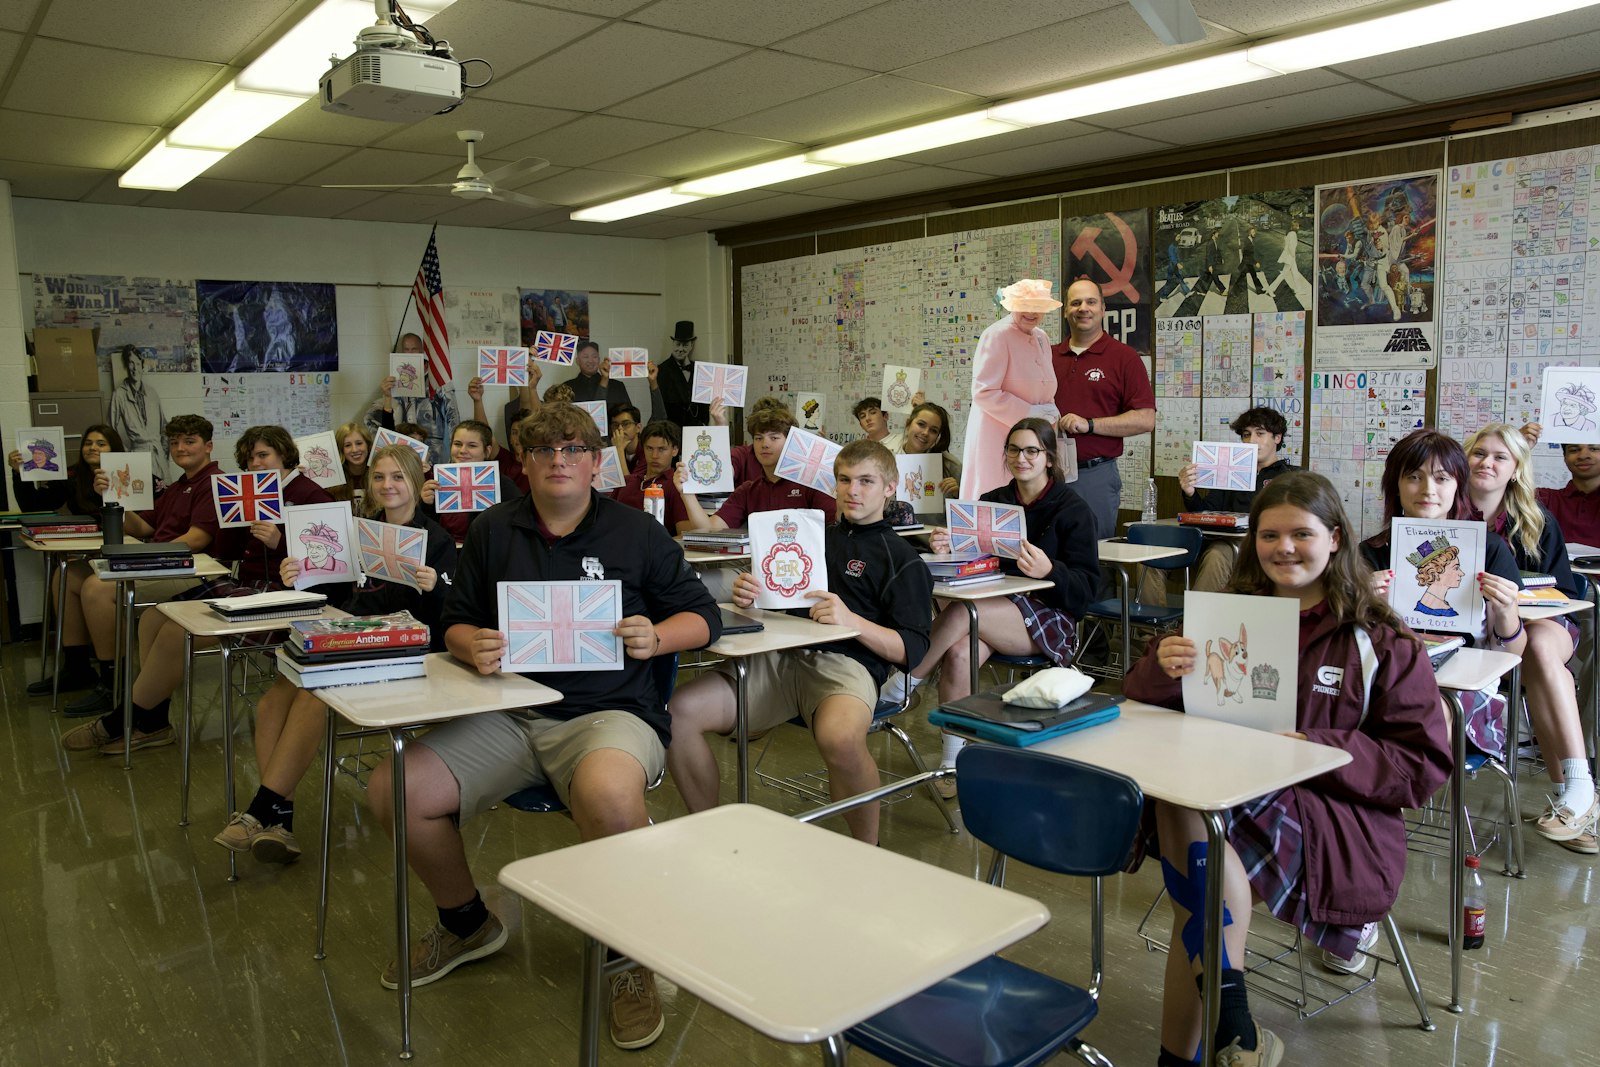 Rutkowski weaves the queen's life and legacy into lessons ranging from government to economics, and teaches his students about the example she sets on the world stage. His classroom walls are plastered with images drawn by students over the years depicting the queen, along with other historical figures and events.